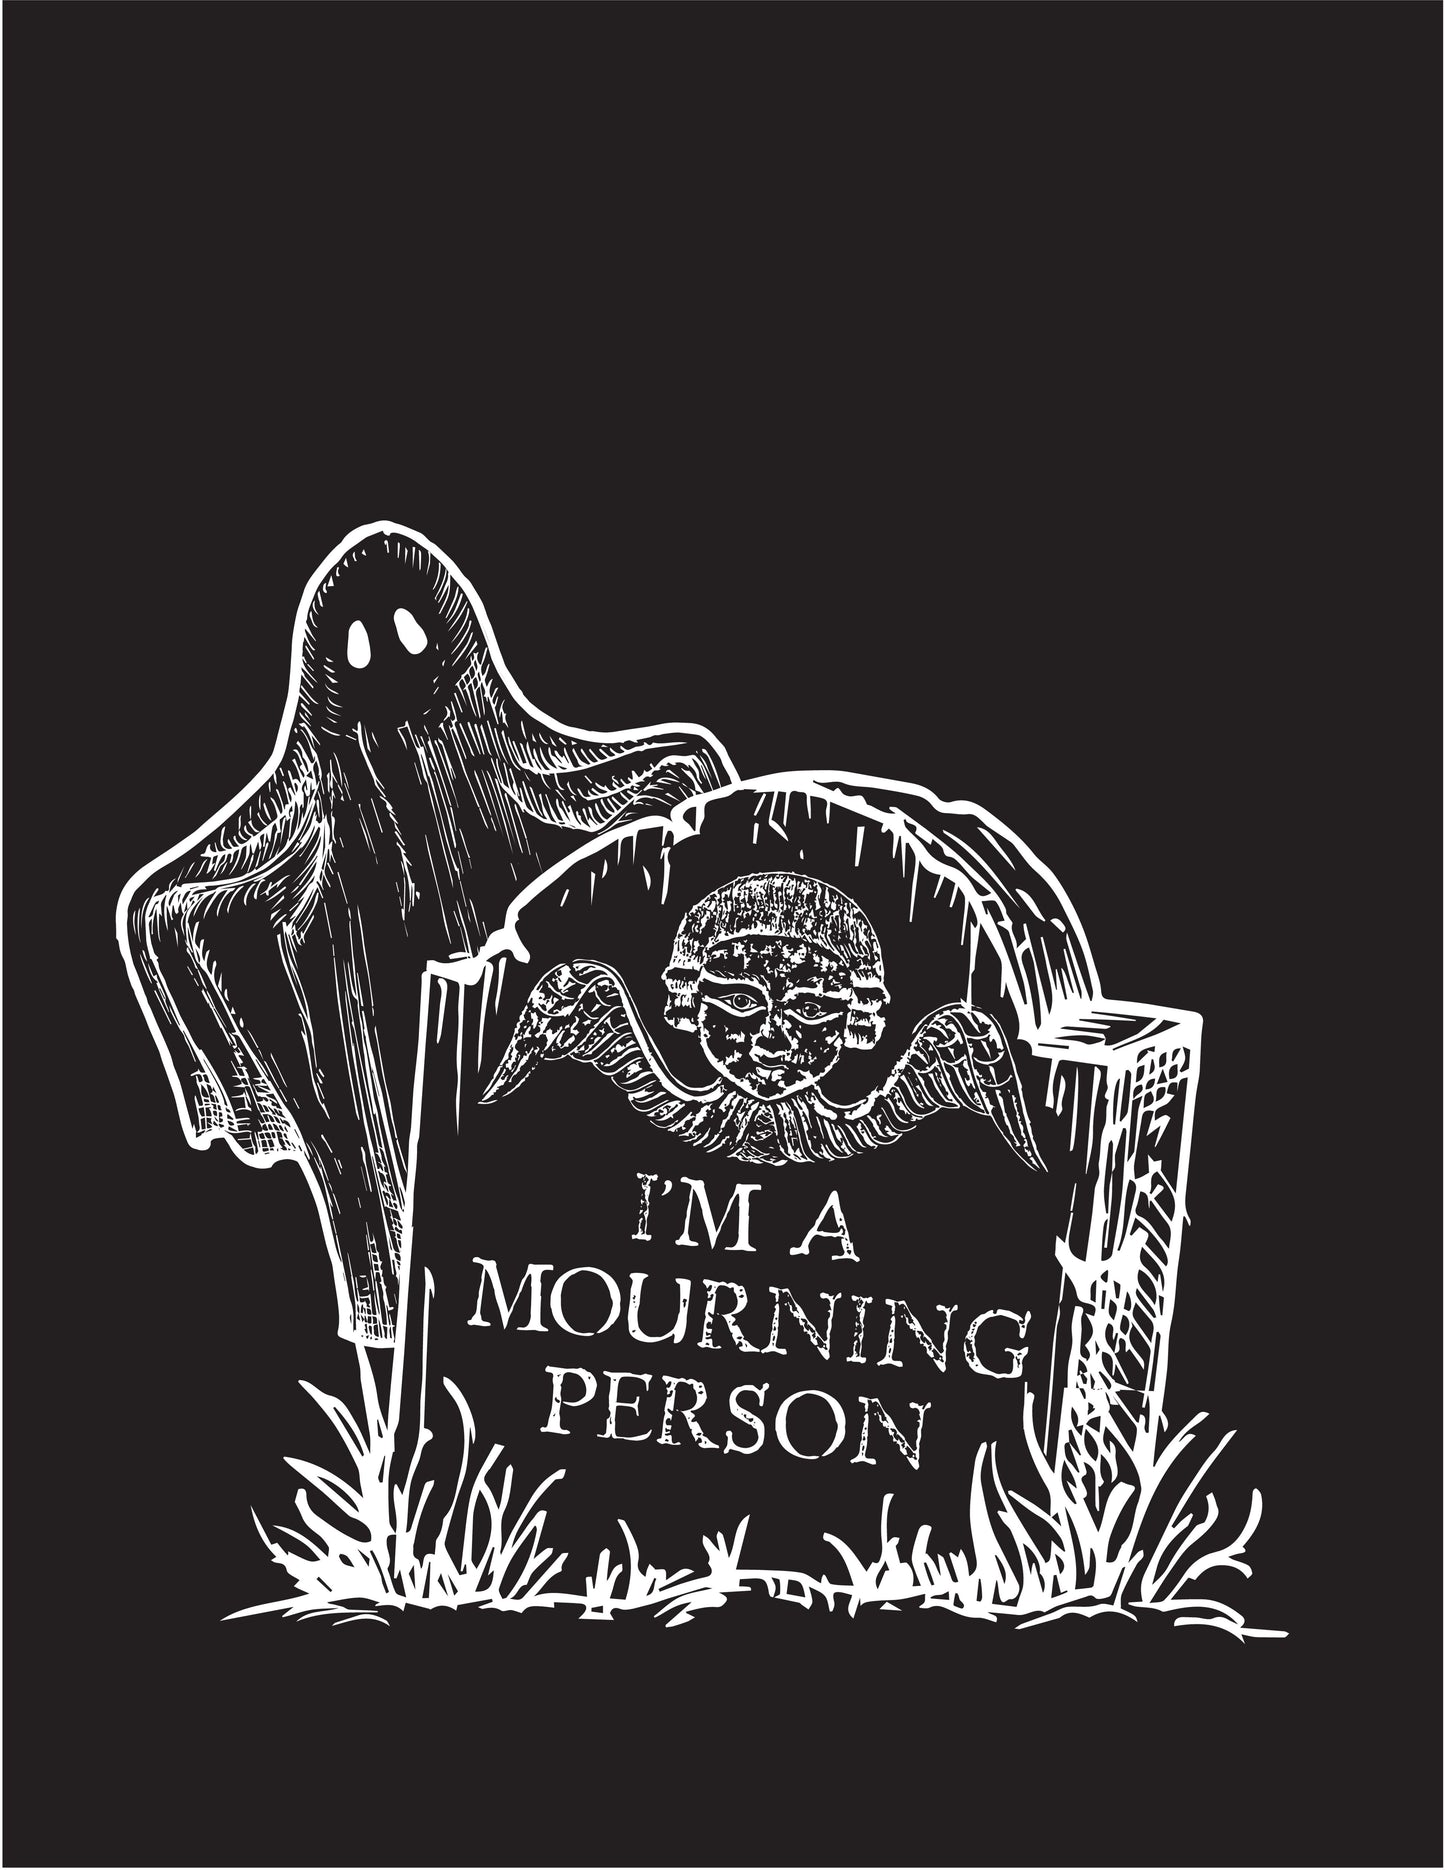 I'm A Mourning Person - Sweatshirt - Glow-in-the-dark Ink